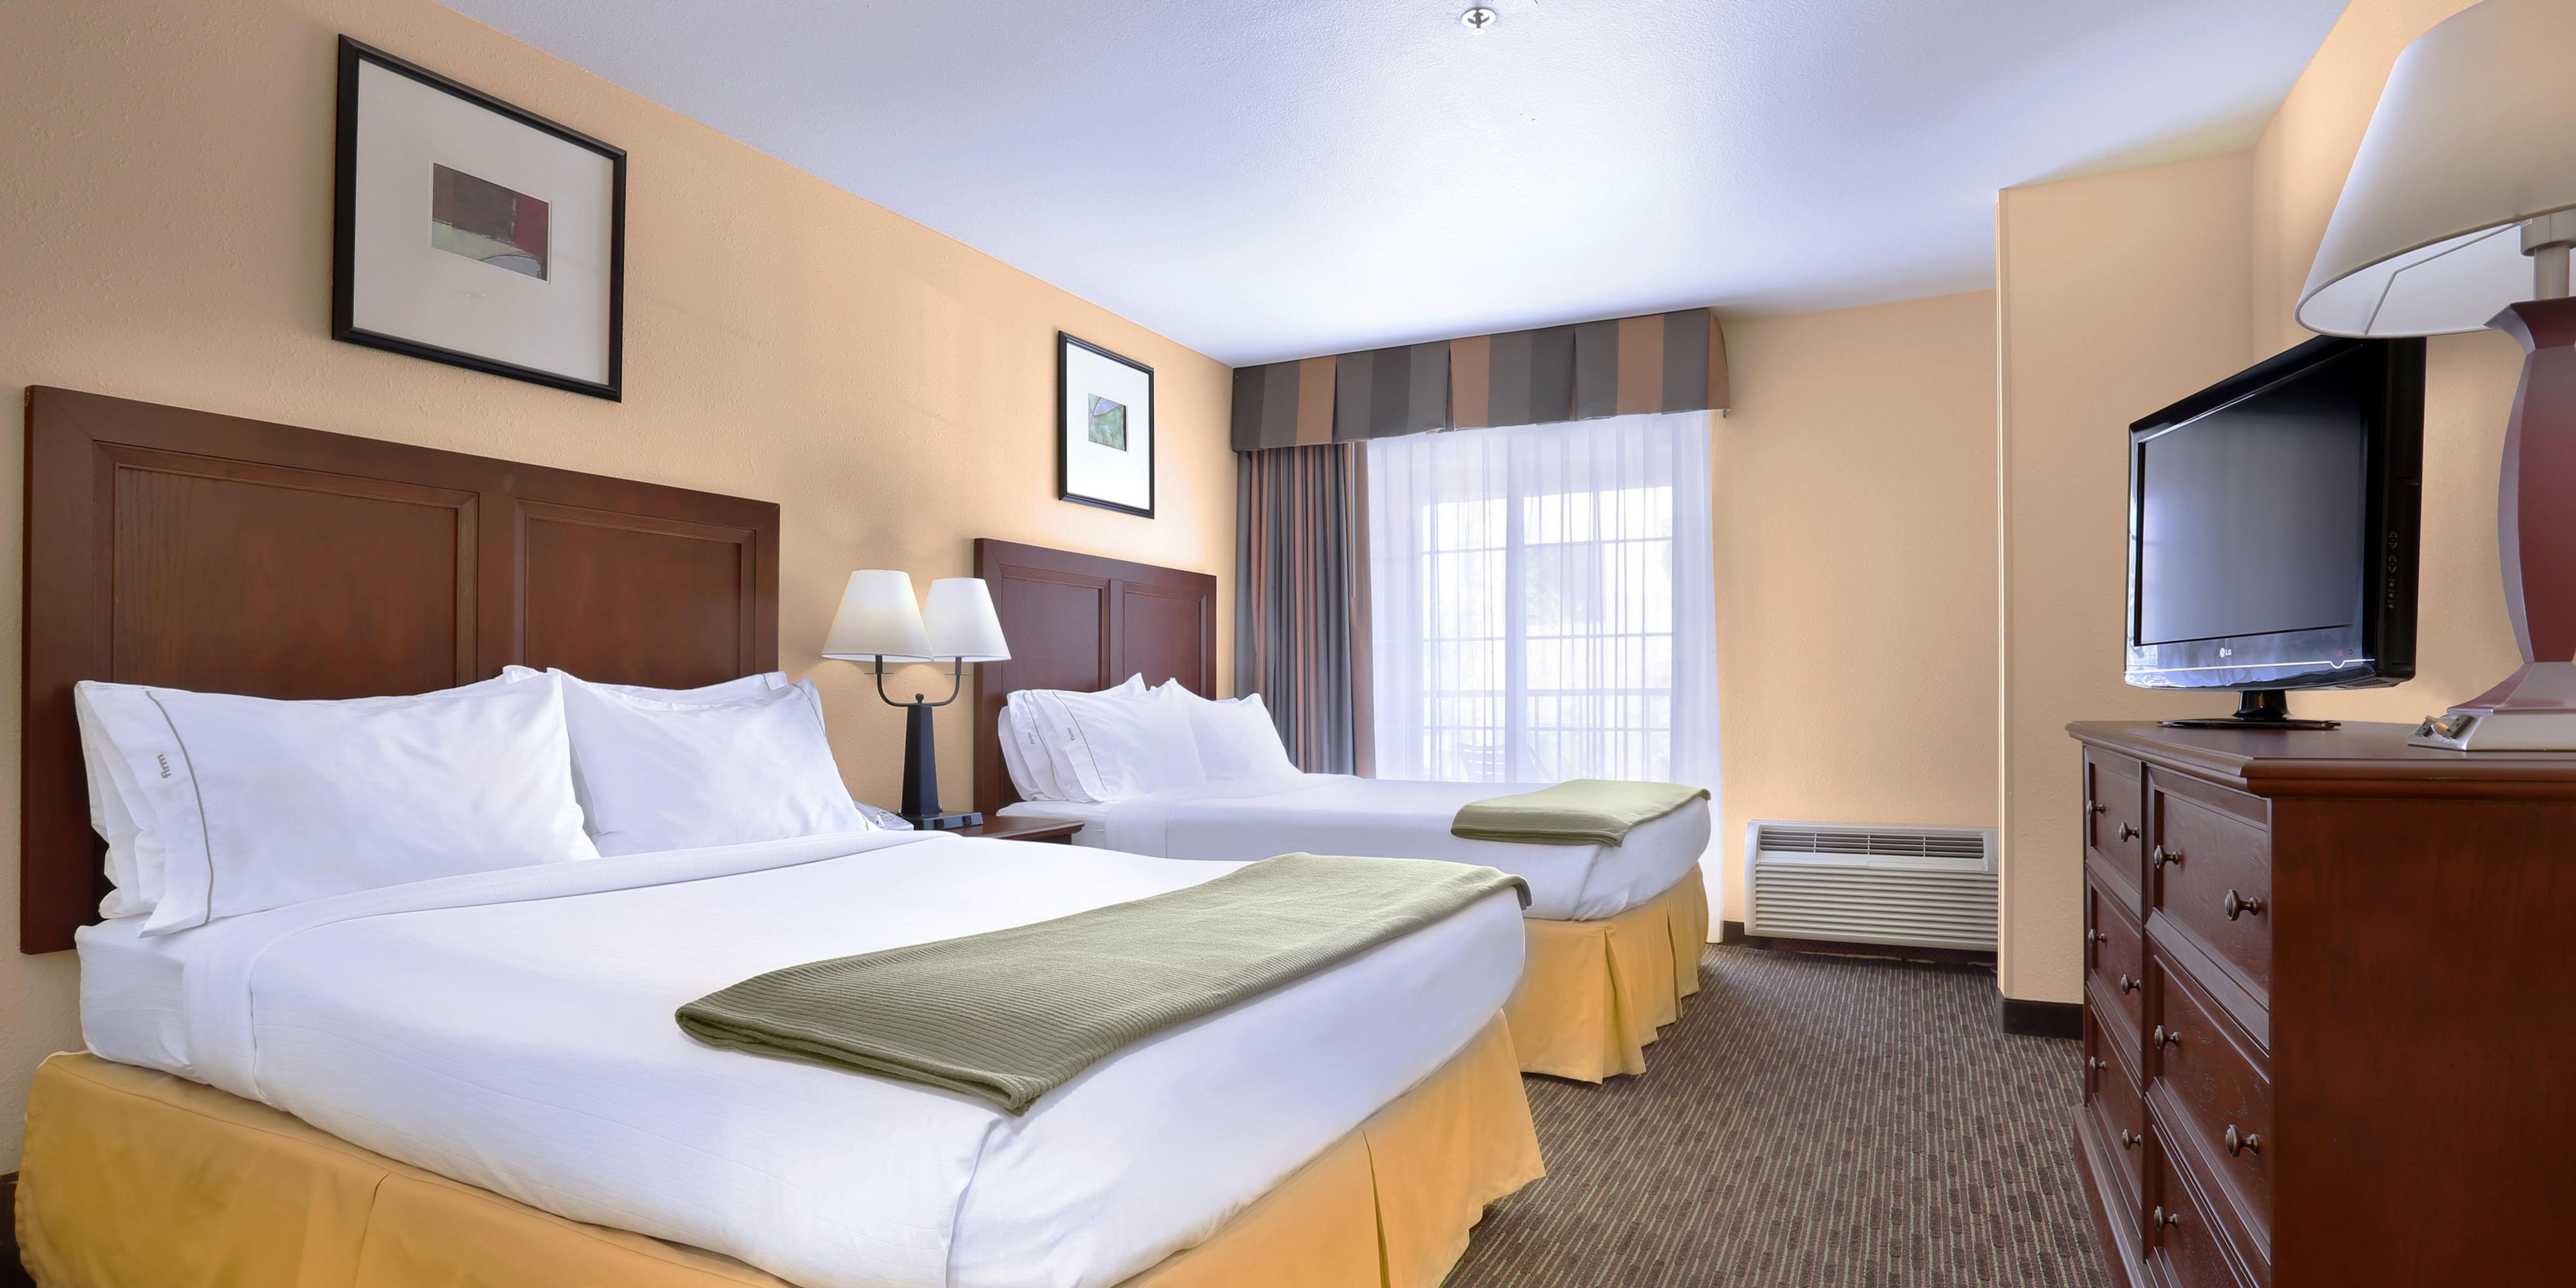 Do you like extra space when you stay in hotels?  All of our guest rooms are suites that include extra living space, sofa sleepers, and include a fridge and microwave!